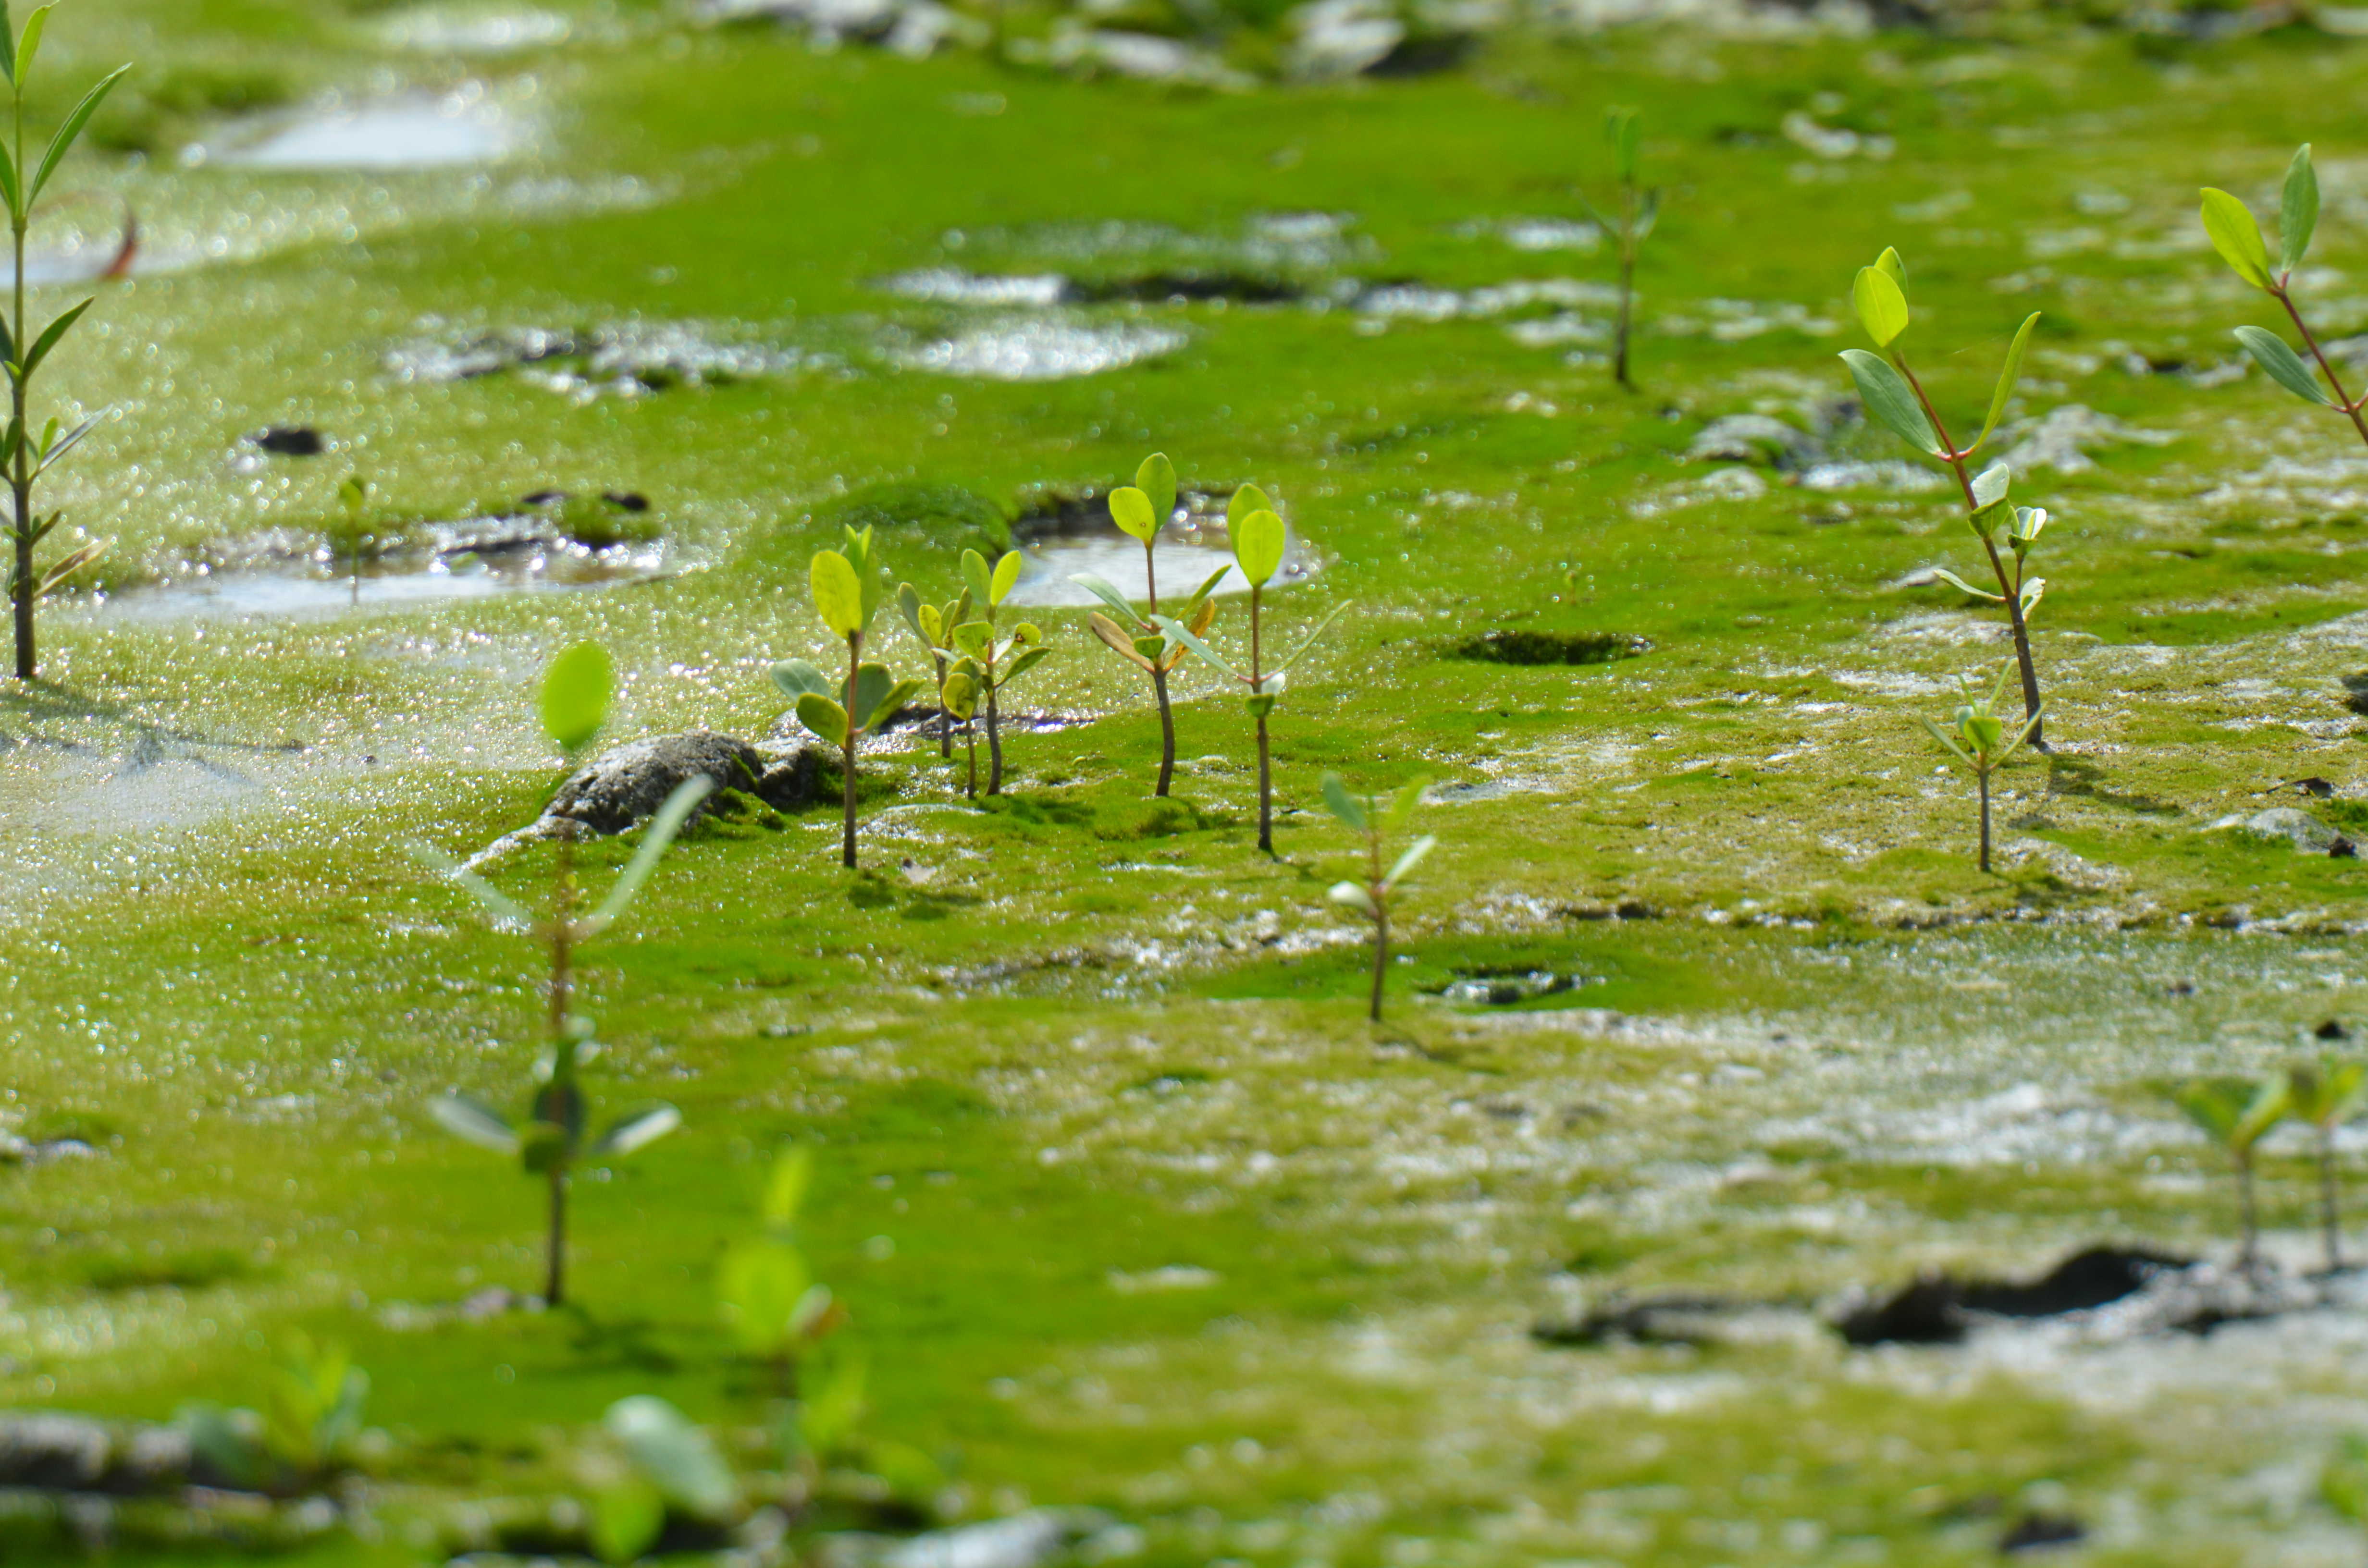 Young mangrove trees with microphytobenthic biofilm at low tide in the intertidal zone of French Guyana (L Denis)